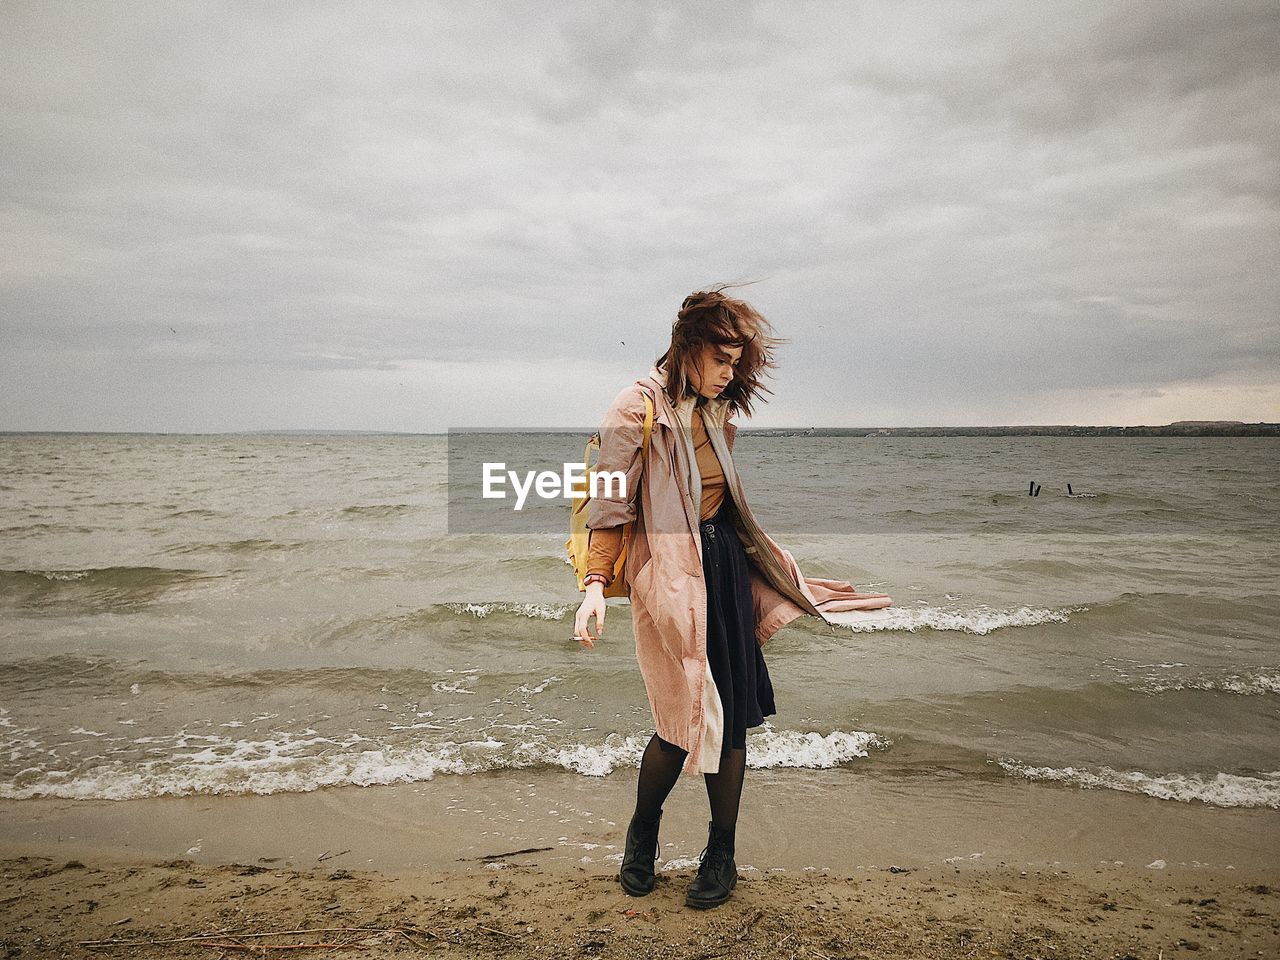 Fashionable woman standing on beach against sea against sky